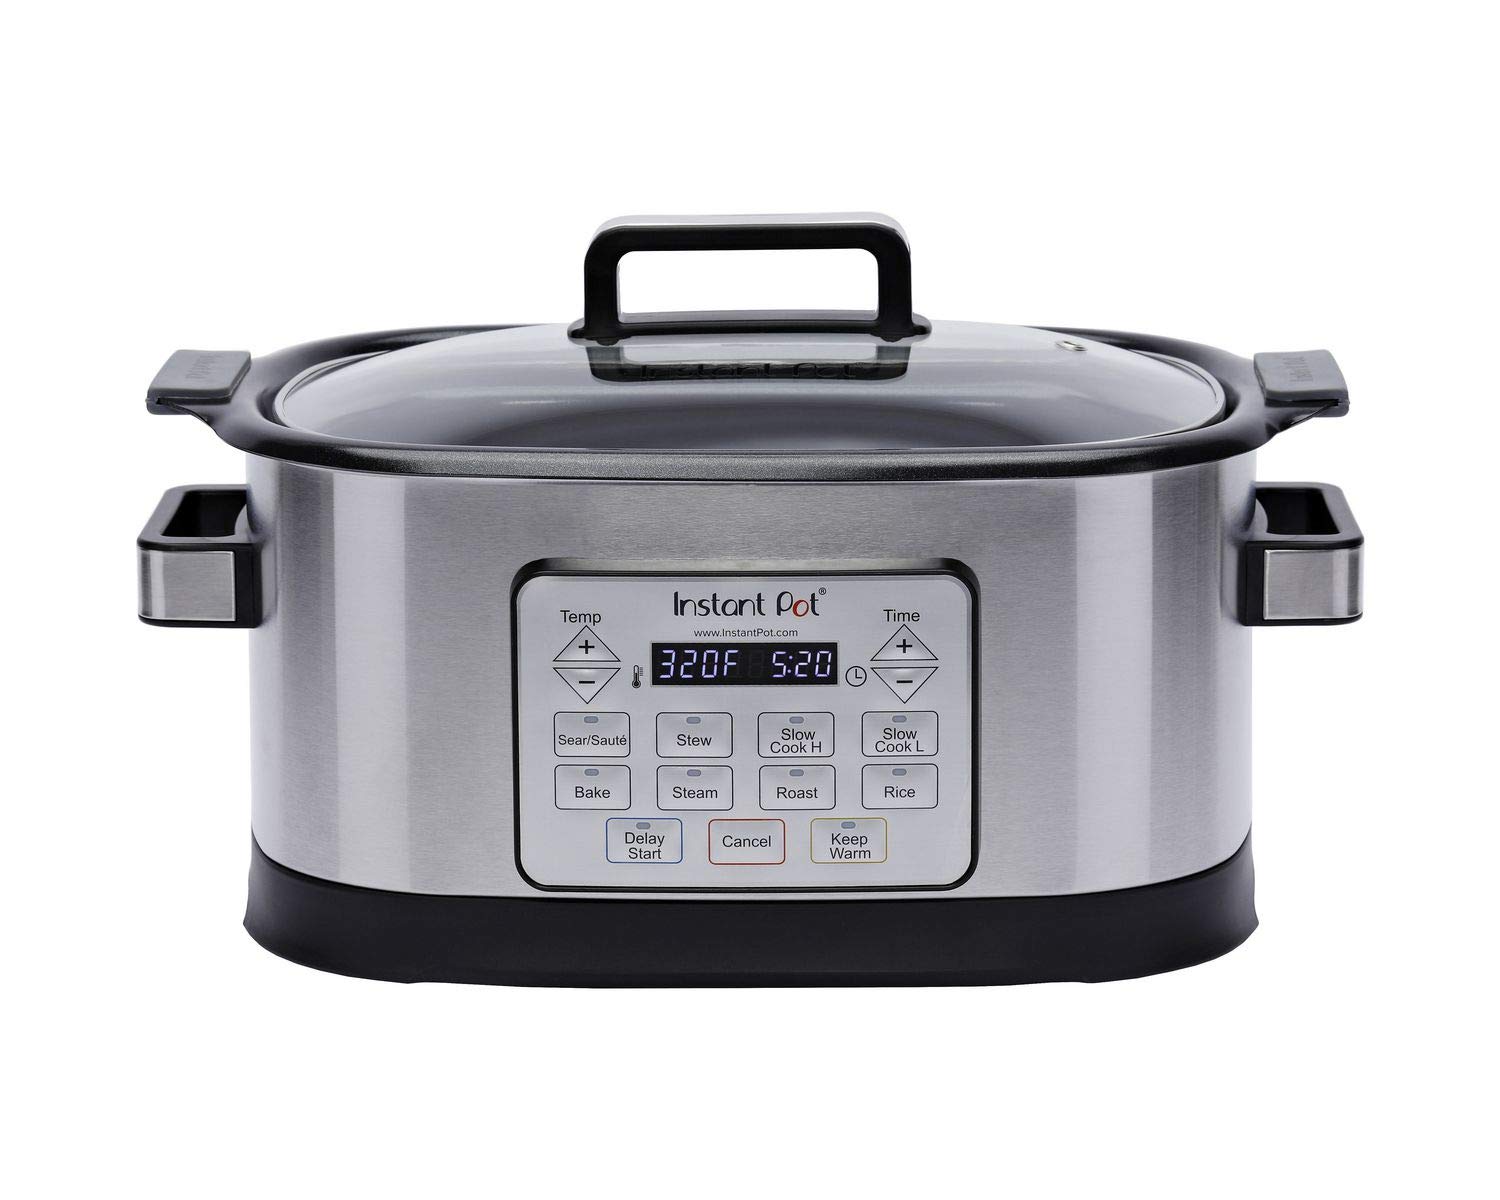 Instant Pot Gem 6 Qt 8-in-1 Programmable Multi-cooker with Advanced Microprocessor Technology